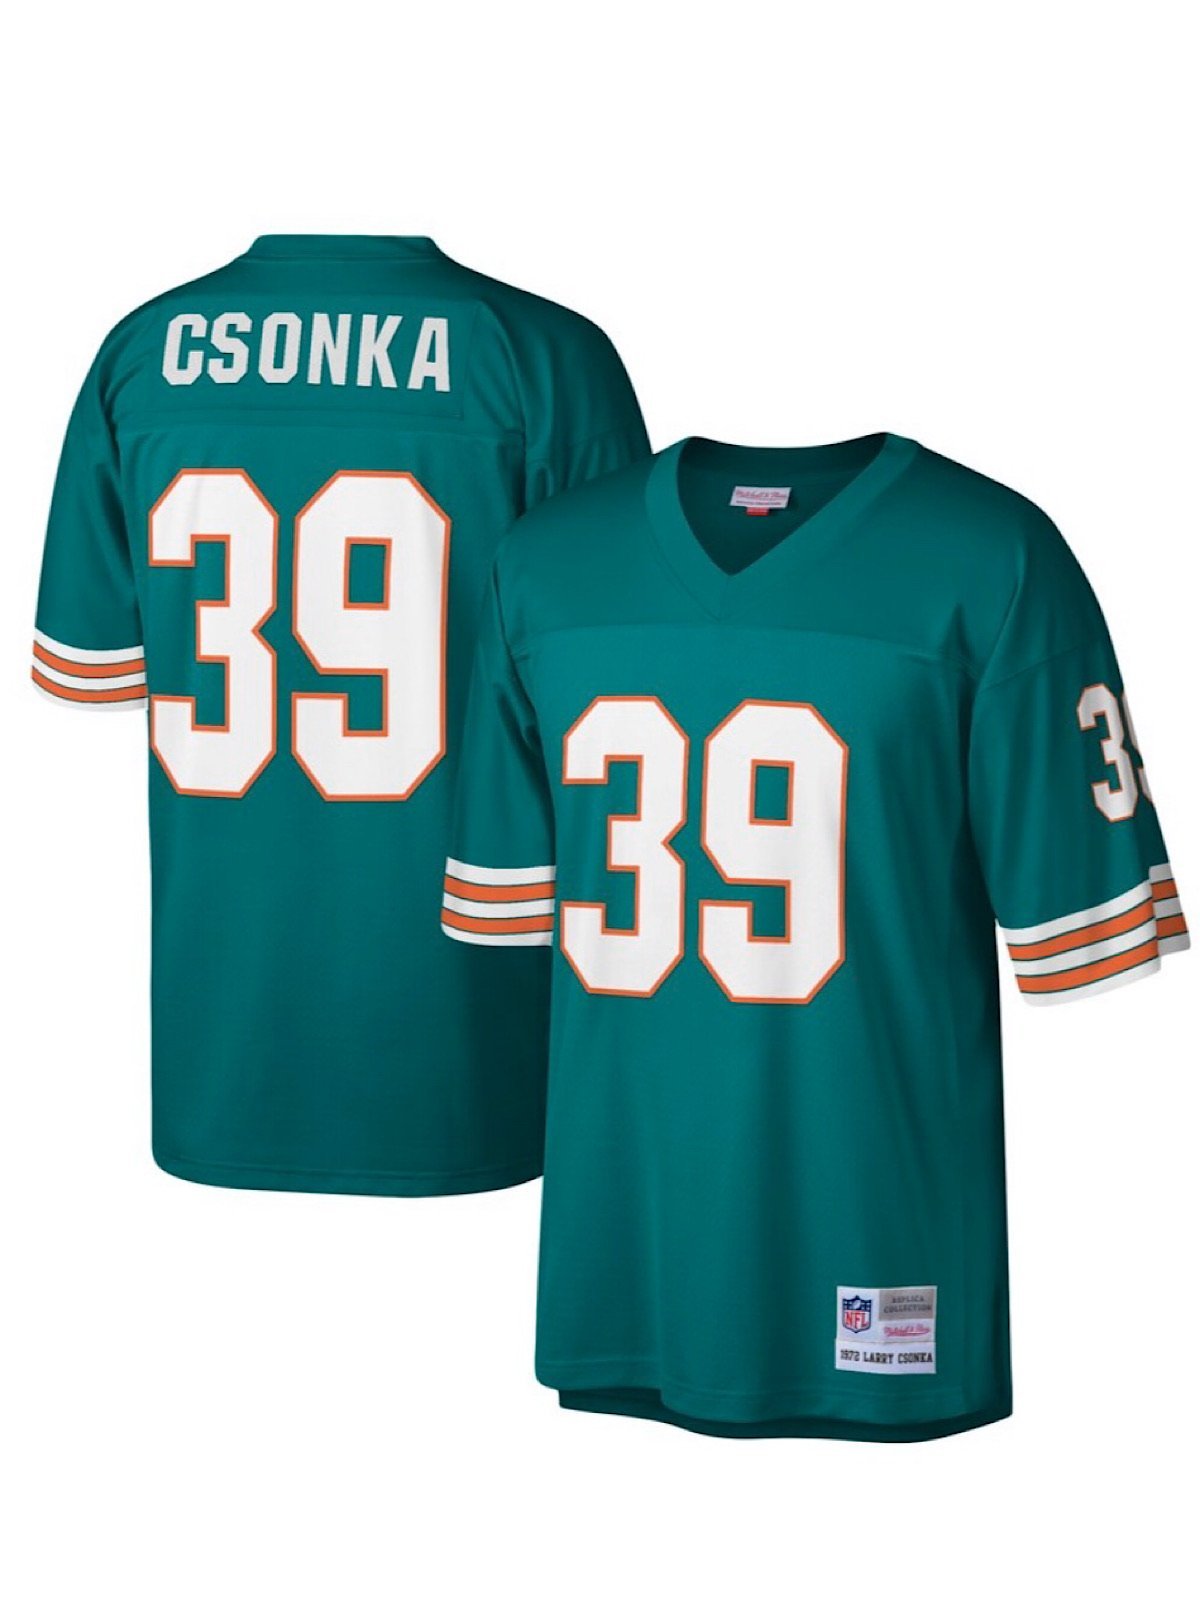 miami dolphins teal jersey